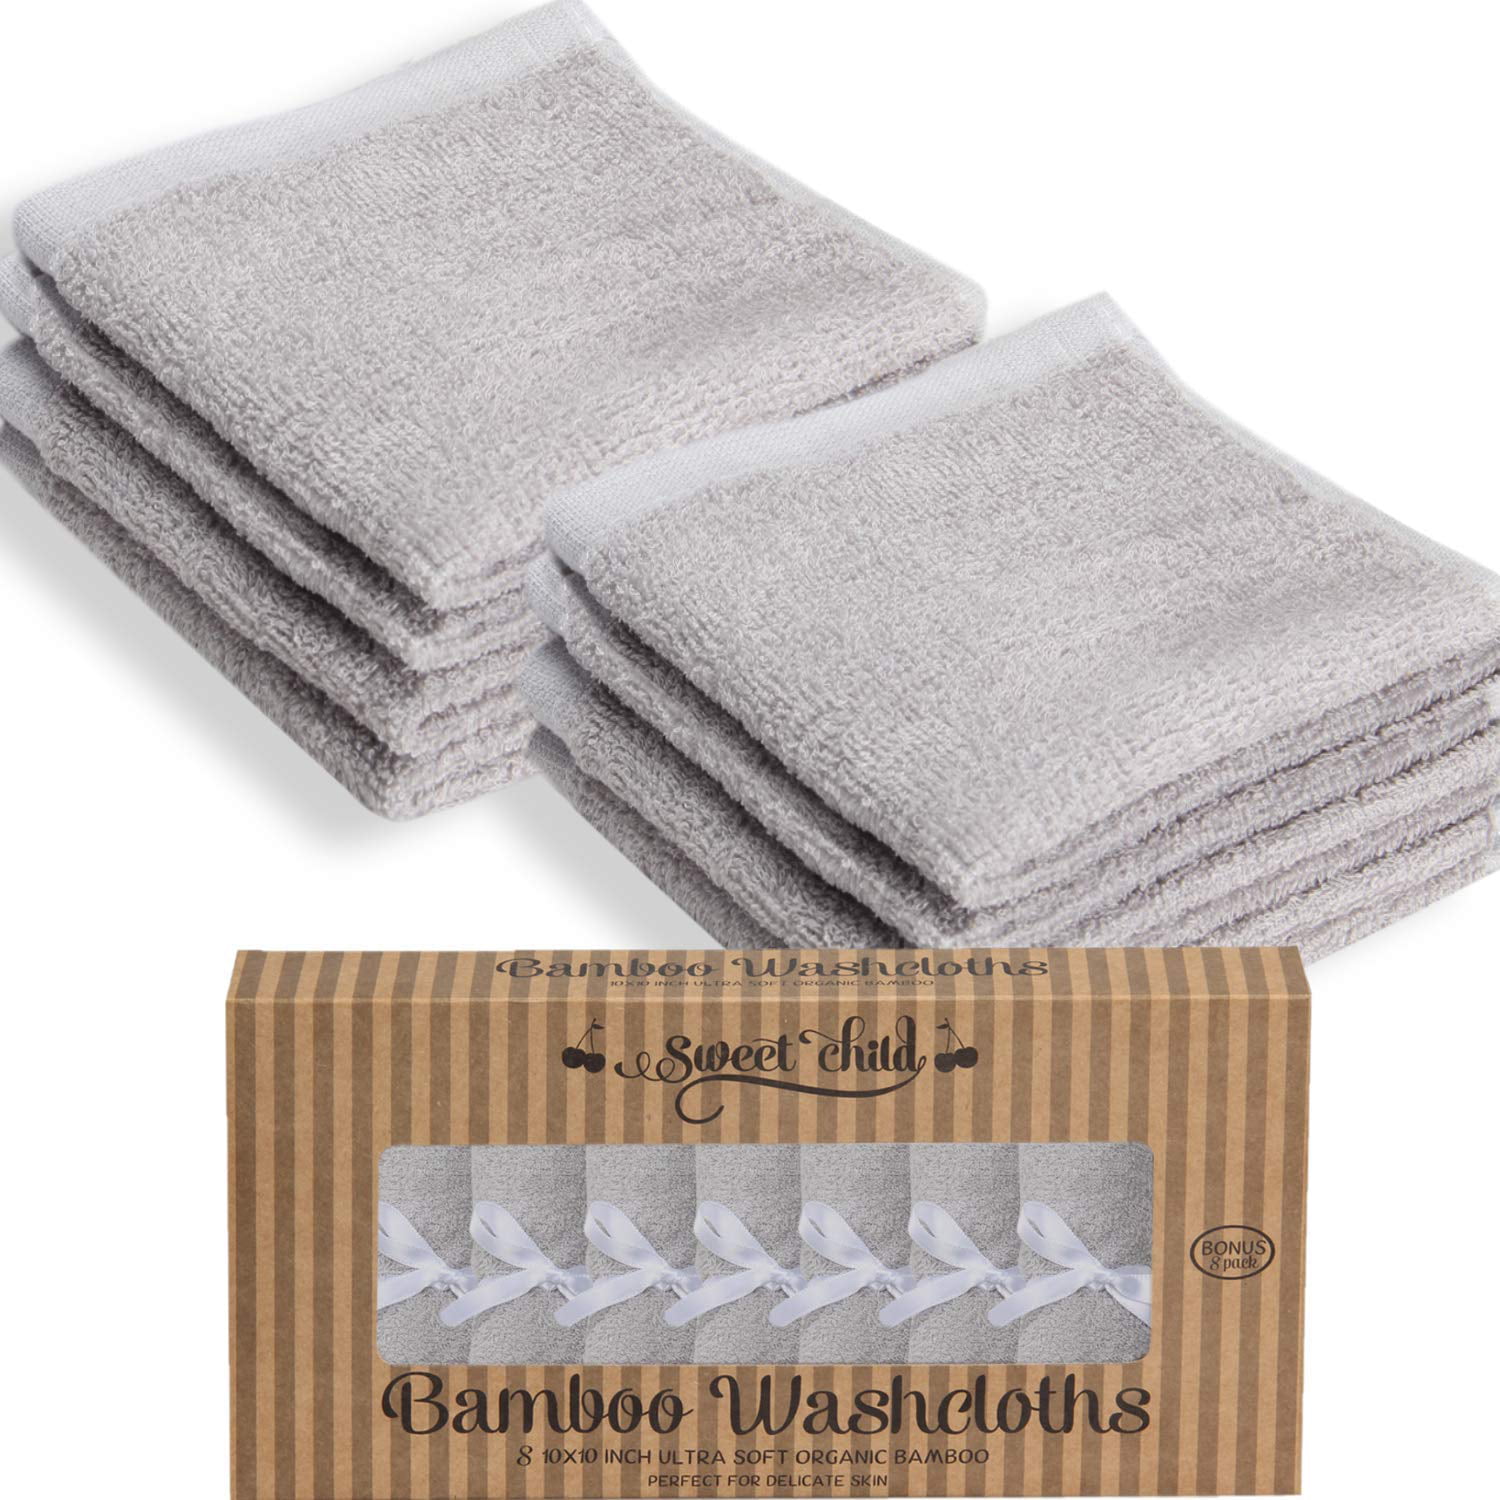 Storeofbaby Baby Washcloths Bamboo Fiber Eco-Friendly Reusable Wipes 6 Pack 10 X 10